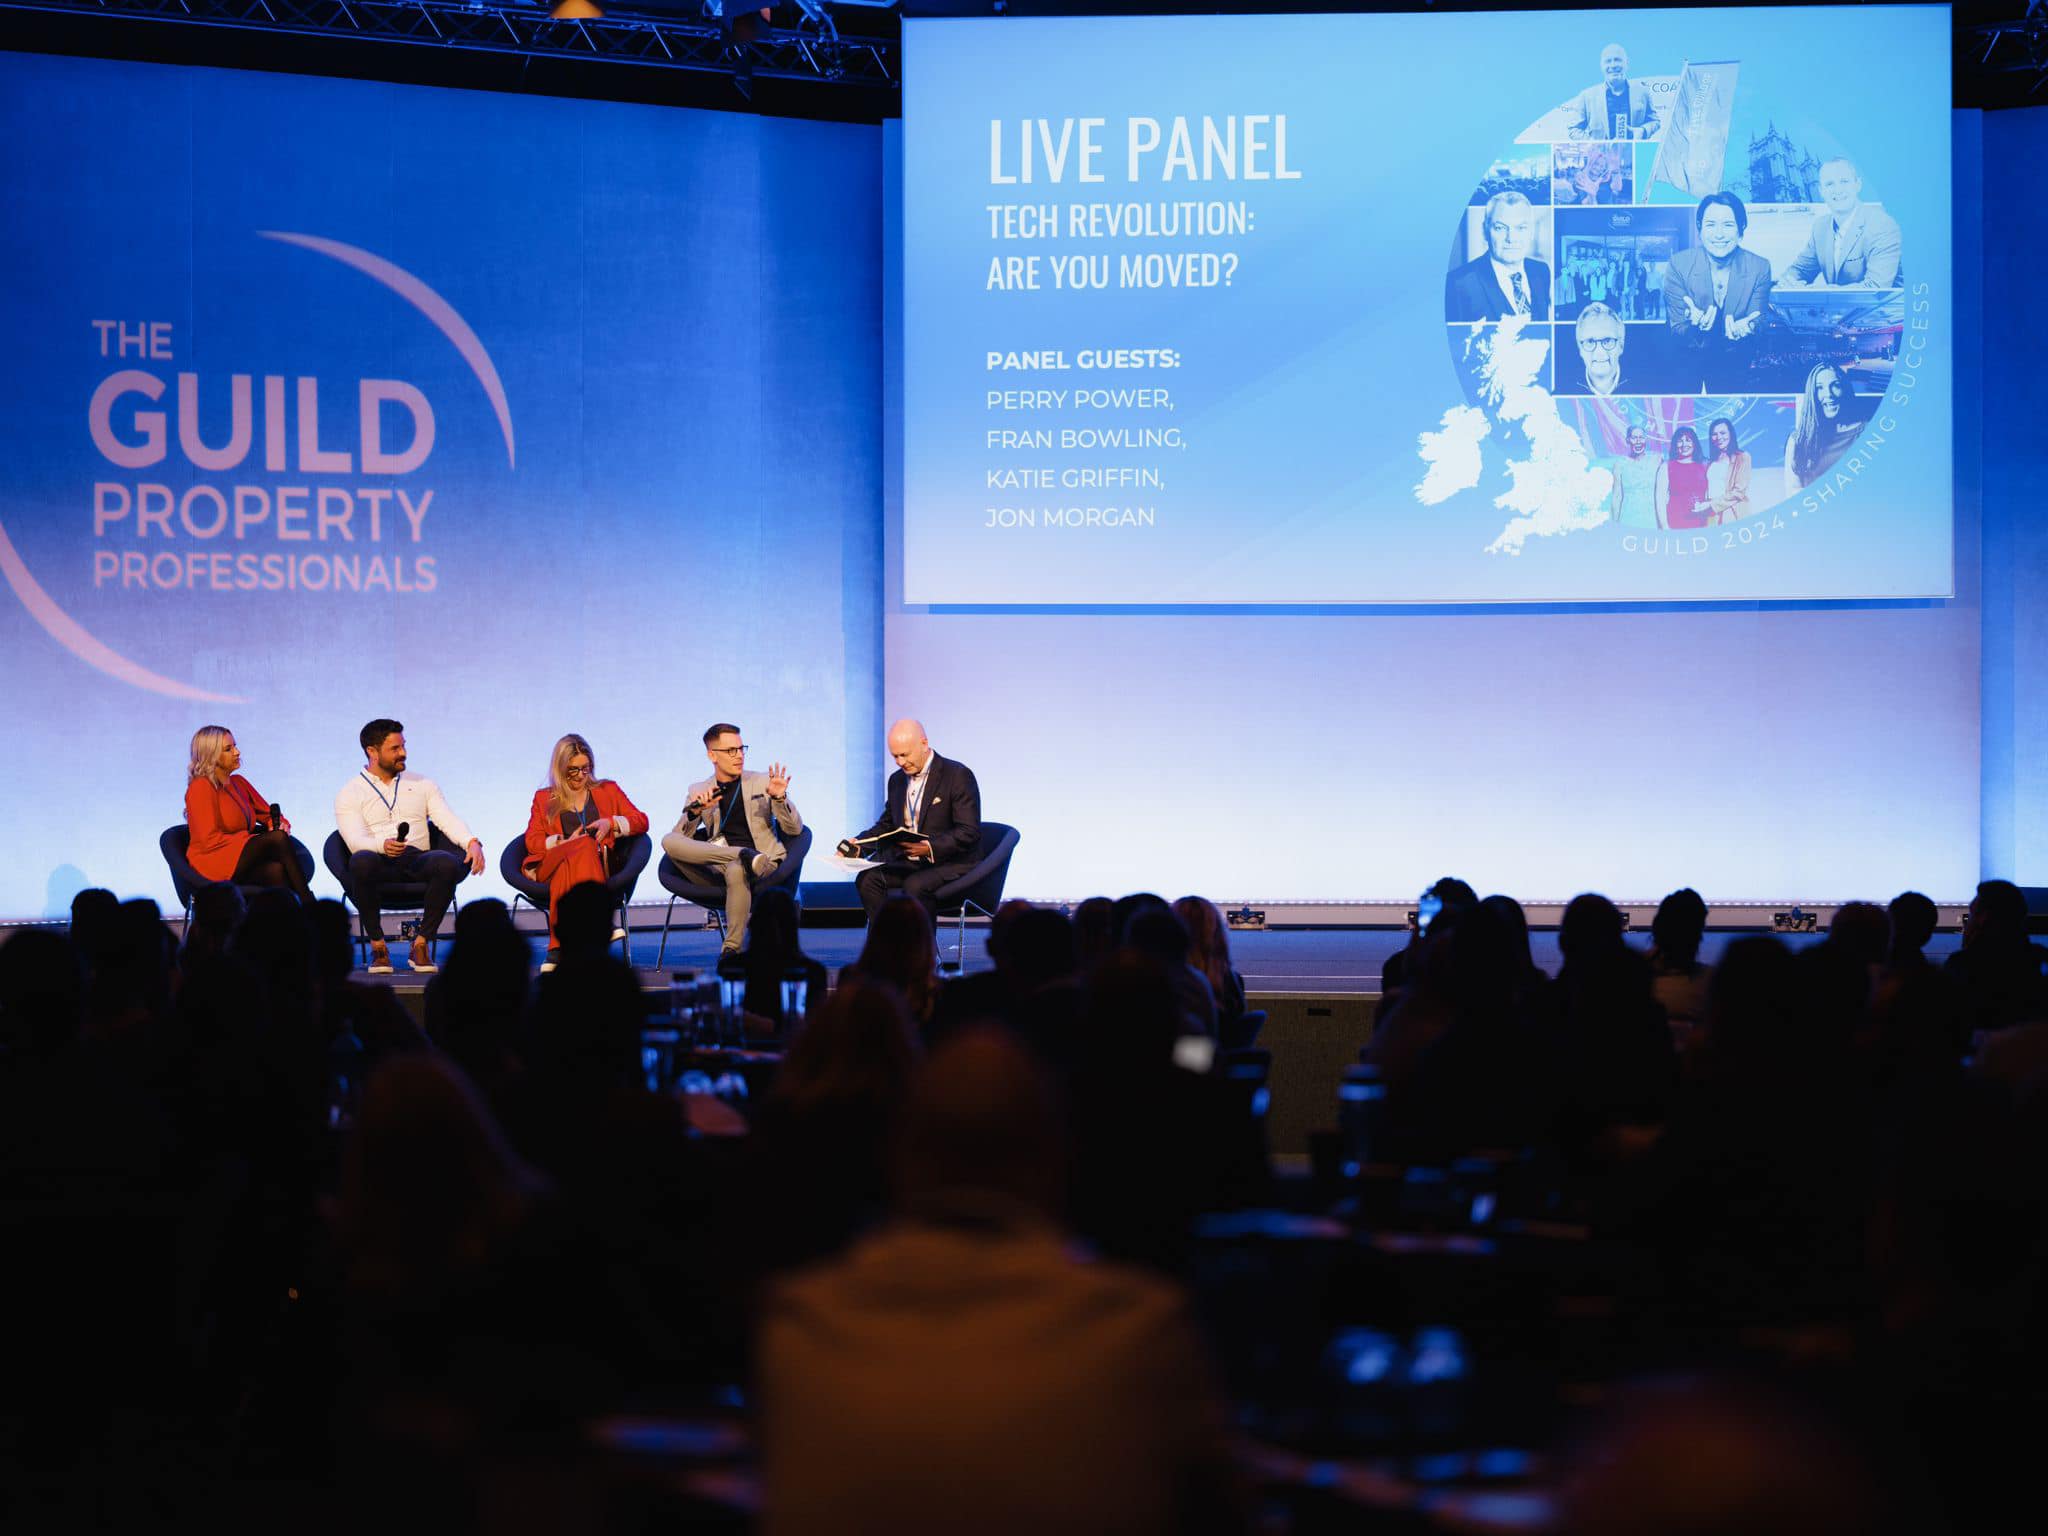 Led by Iain McKenzie, CEO of The Guild of Property Professionals, the conference aimed to champion industry successes both within and outside the network